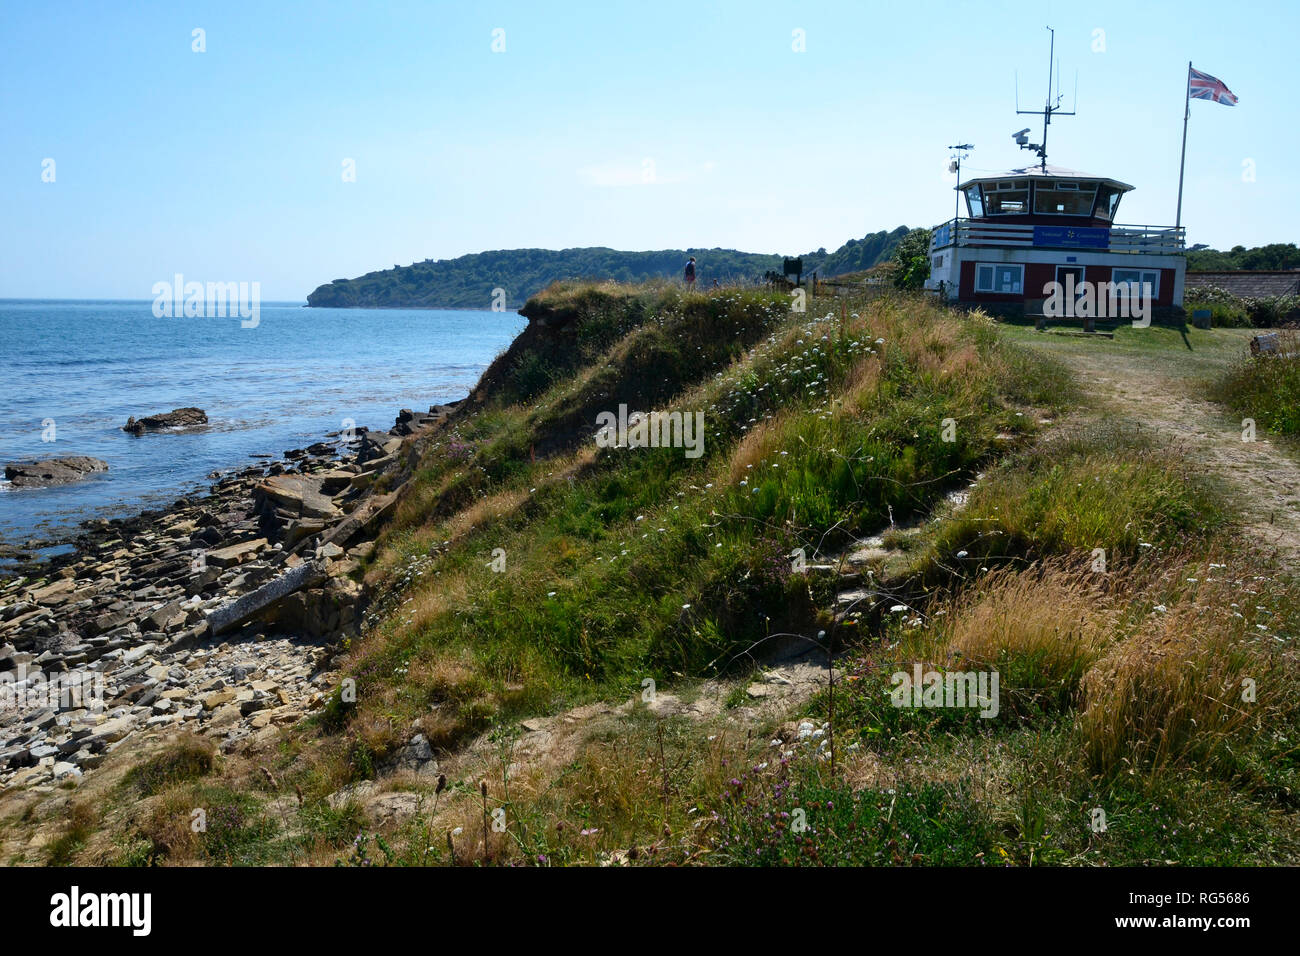 Il Coastwatch lookout a: Peveril Point, Swanage, Isle of Purbeck, Dorset, England, Regno Unito Foto Stock